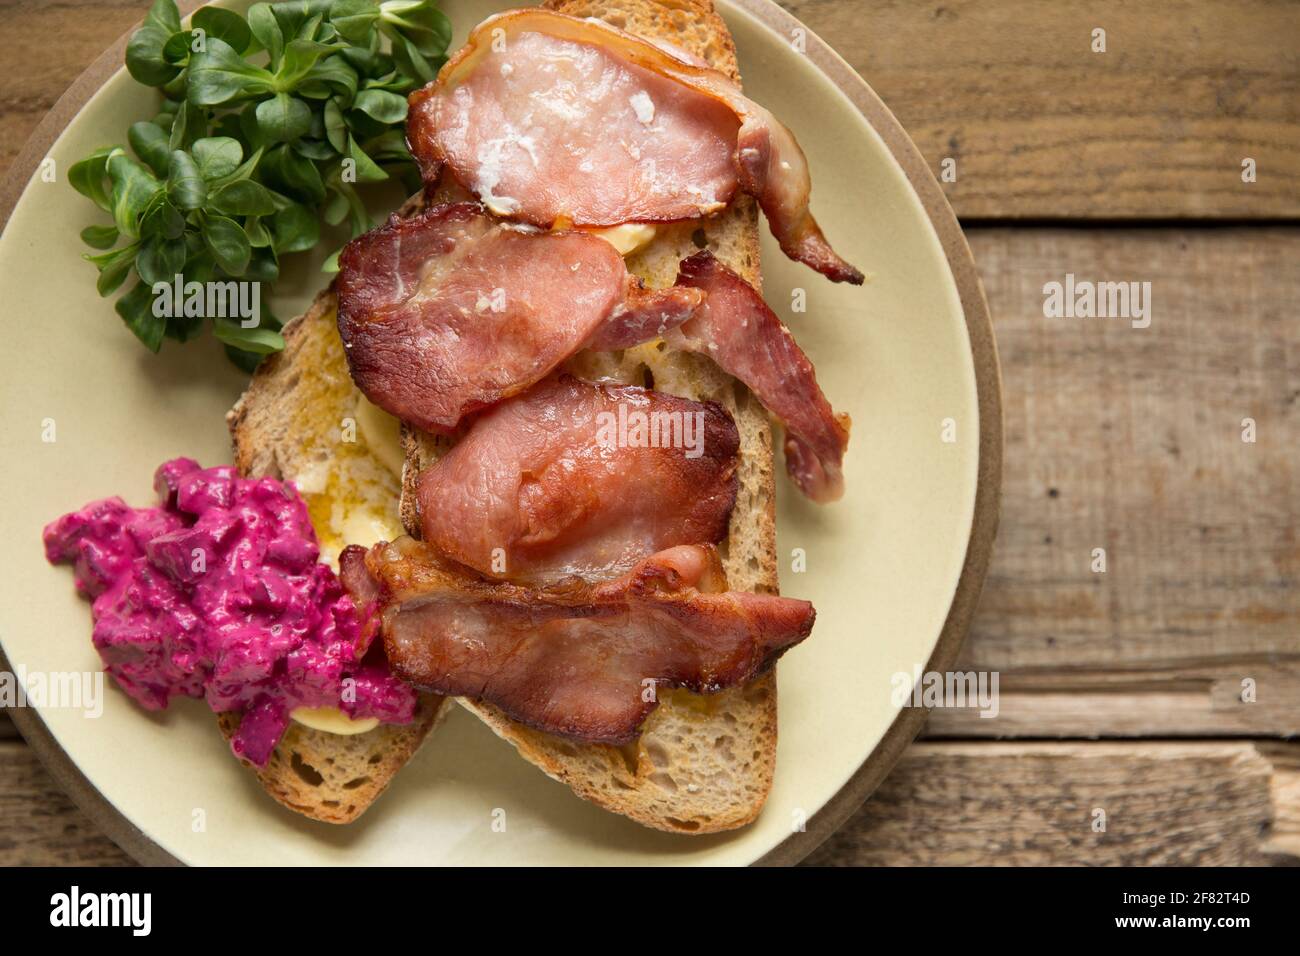 Rashers of smoked back bacon that has been grilled and served on toasted sourdough bread with lambs lettuce and a horseradish and beetroot dressing. T Stock Photo